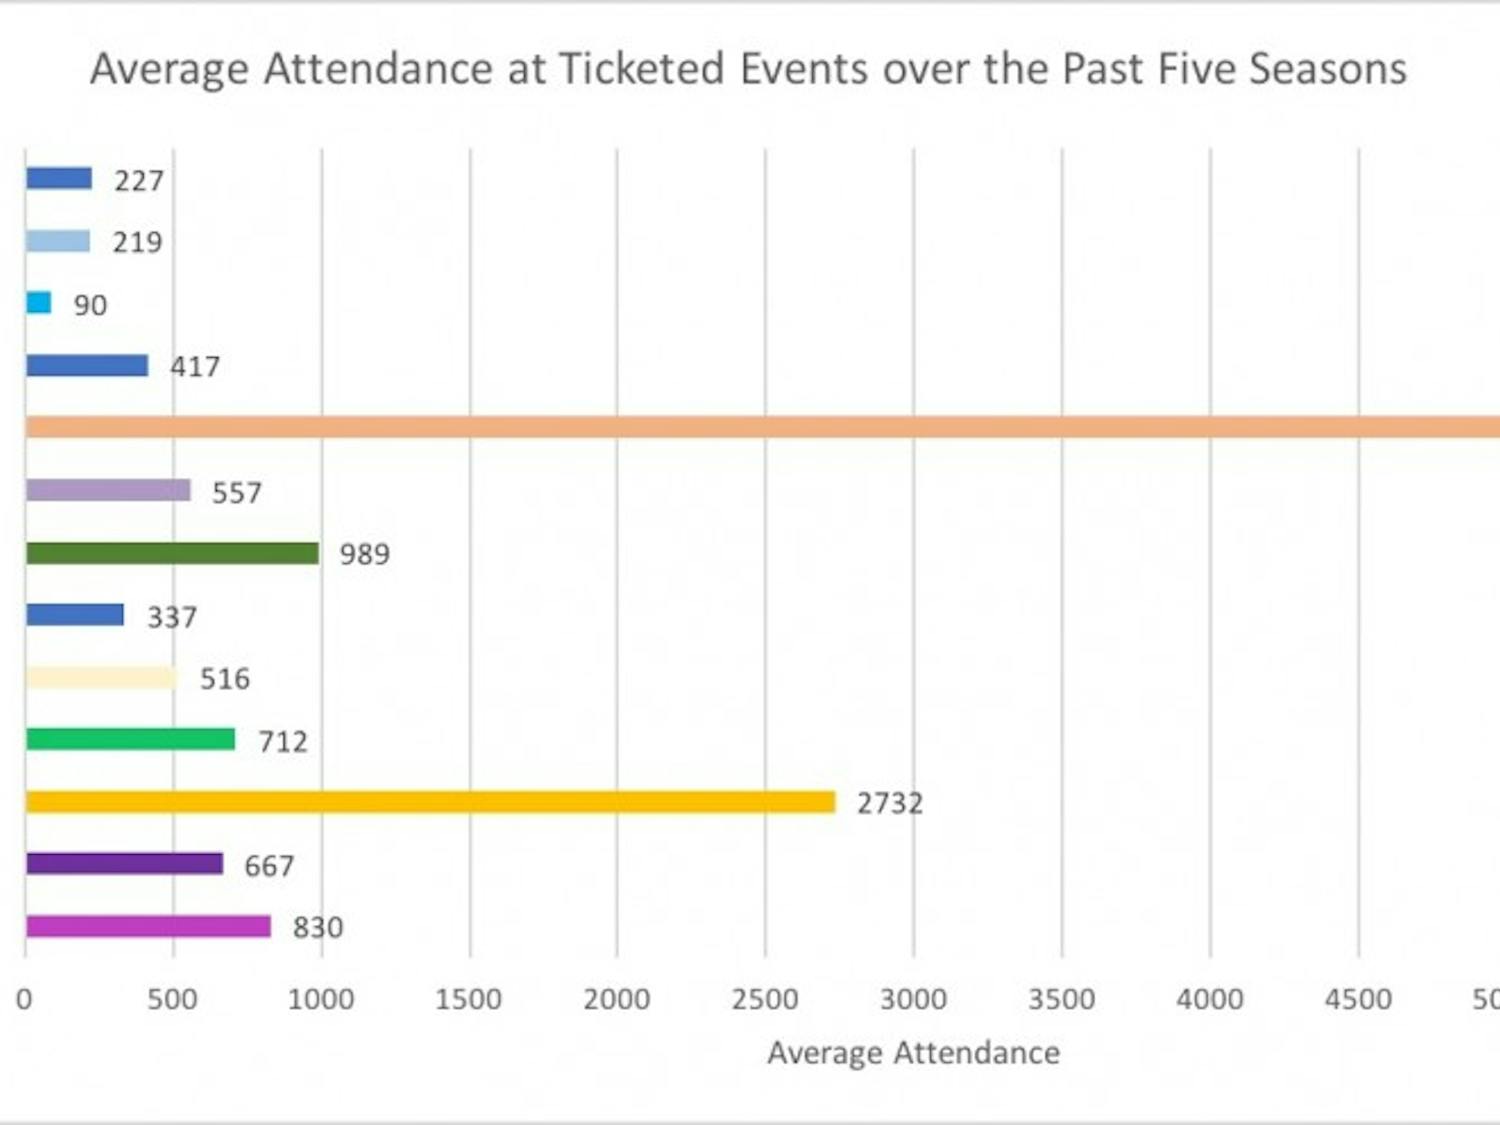 With an average attendance of 5,833 people over the last five seasons, attendance at football games far exceeds attendance at all other ticket sports.